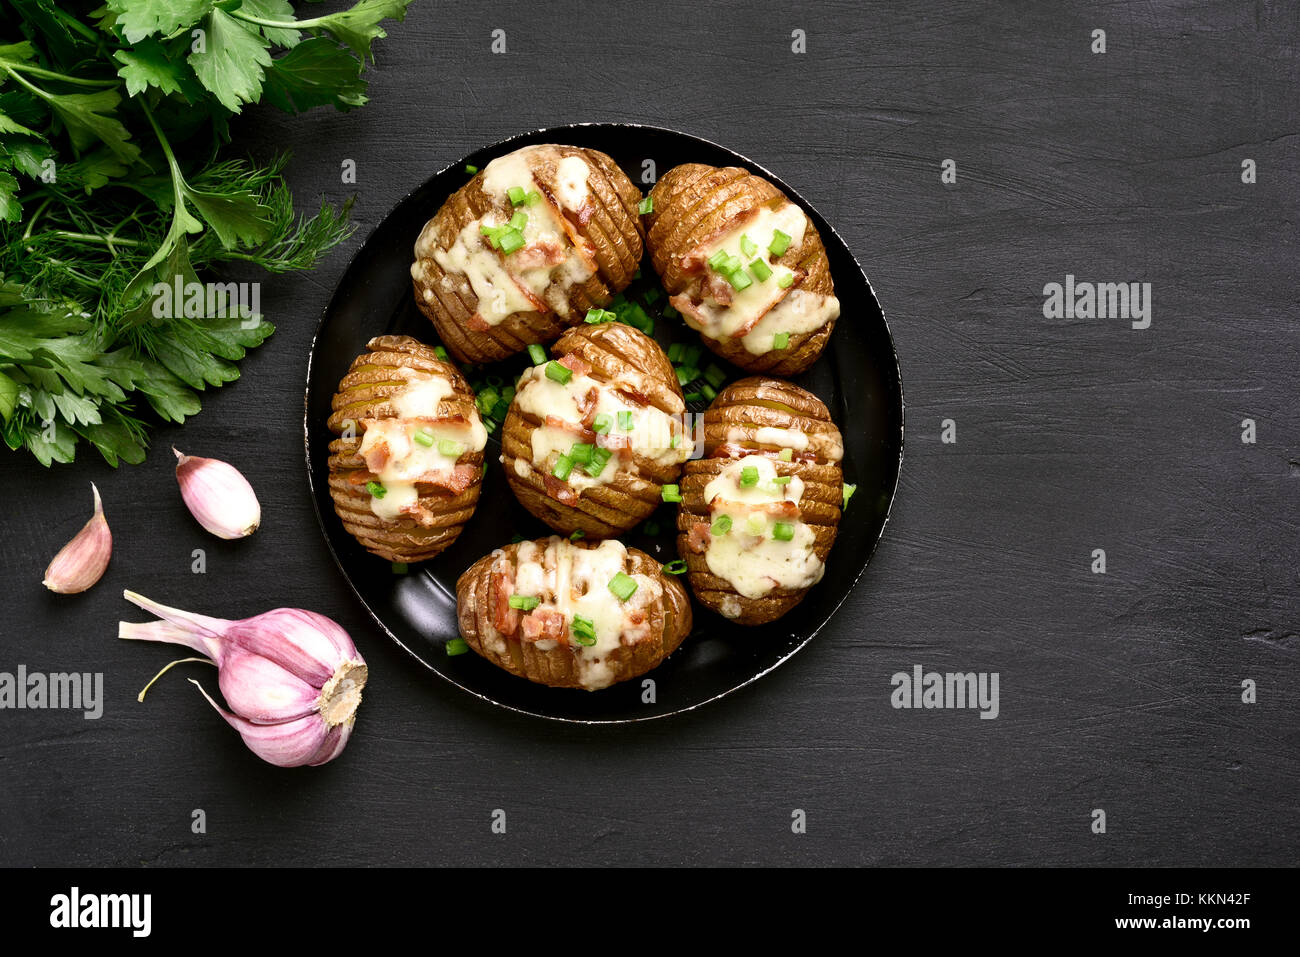 Baked stuffed potatoes with bacon, green onion and cheese on black background with copy space. Top view, flat lay. Stock Photo